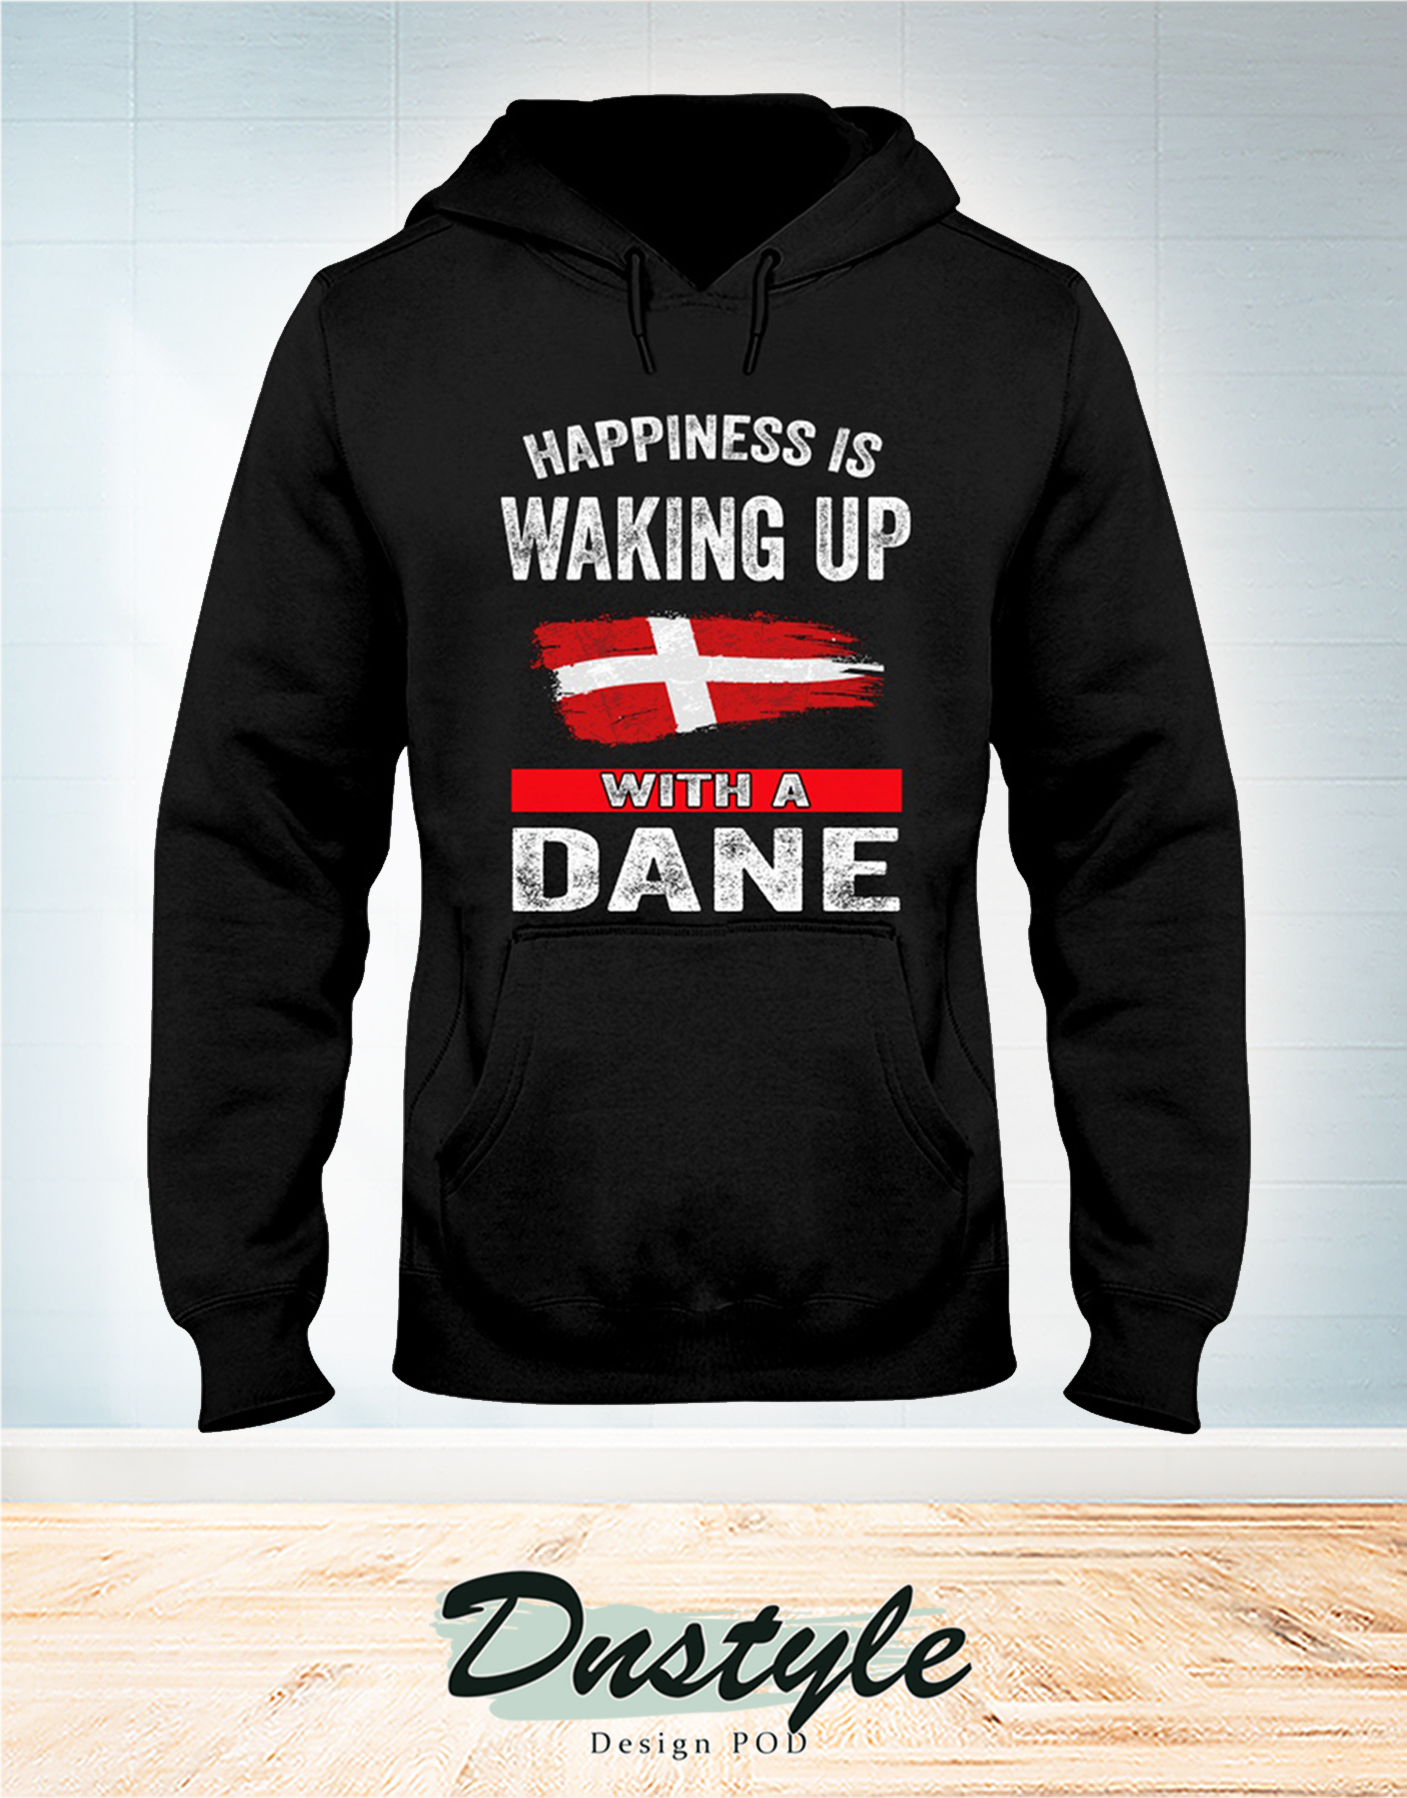 Happiness is waking up with a Dane hoodie